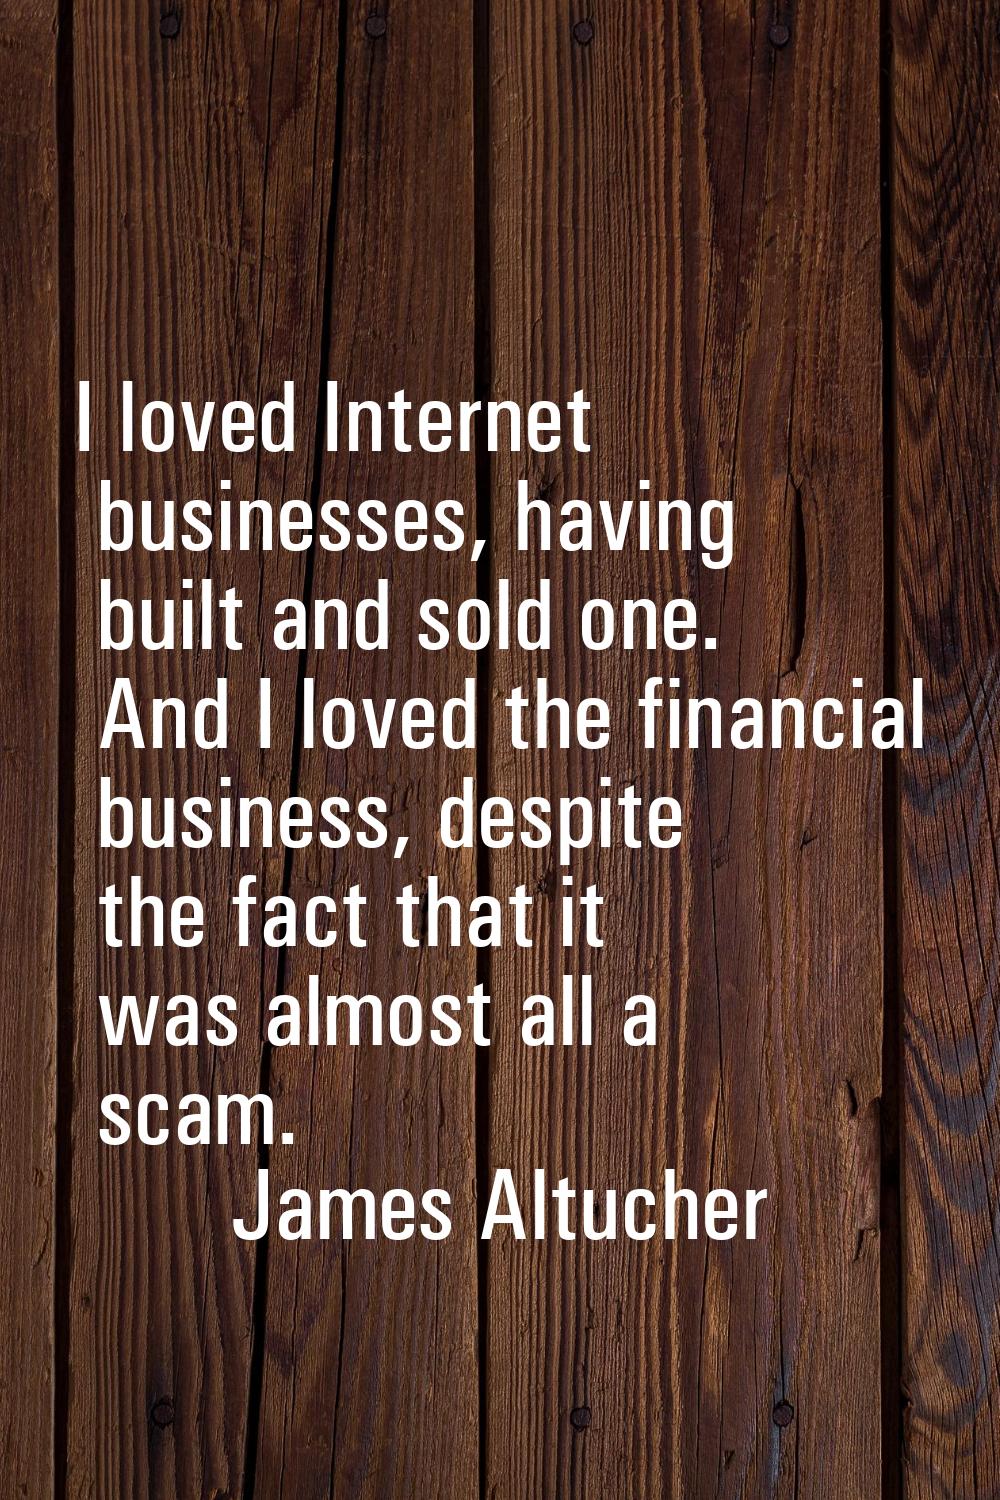 I loved Internet businesses, having built and sold one. And I loved the financial business, despite